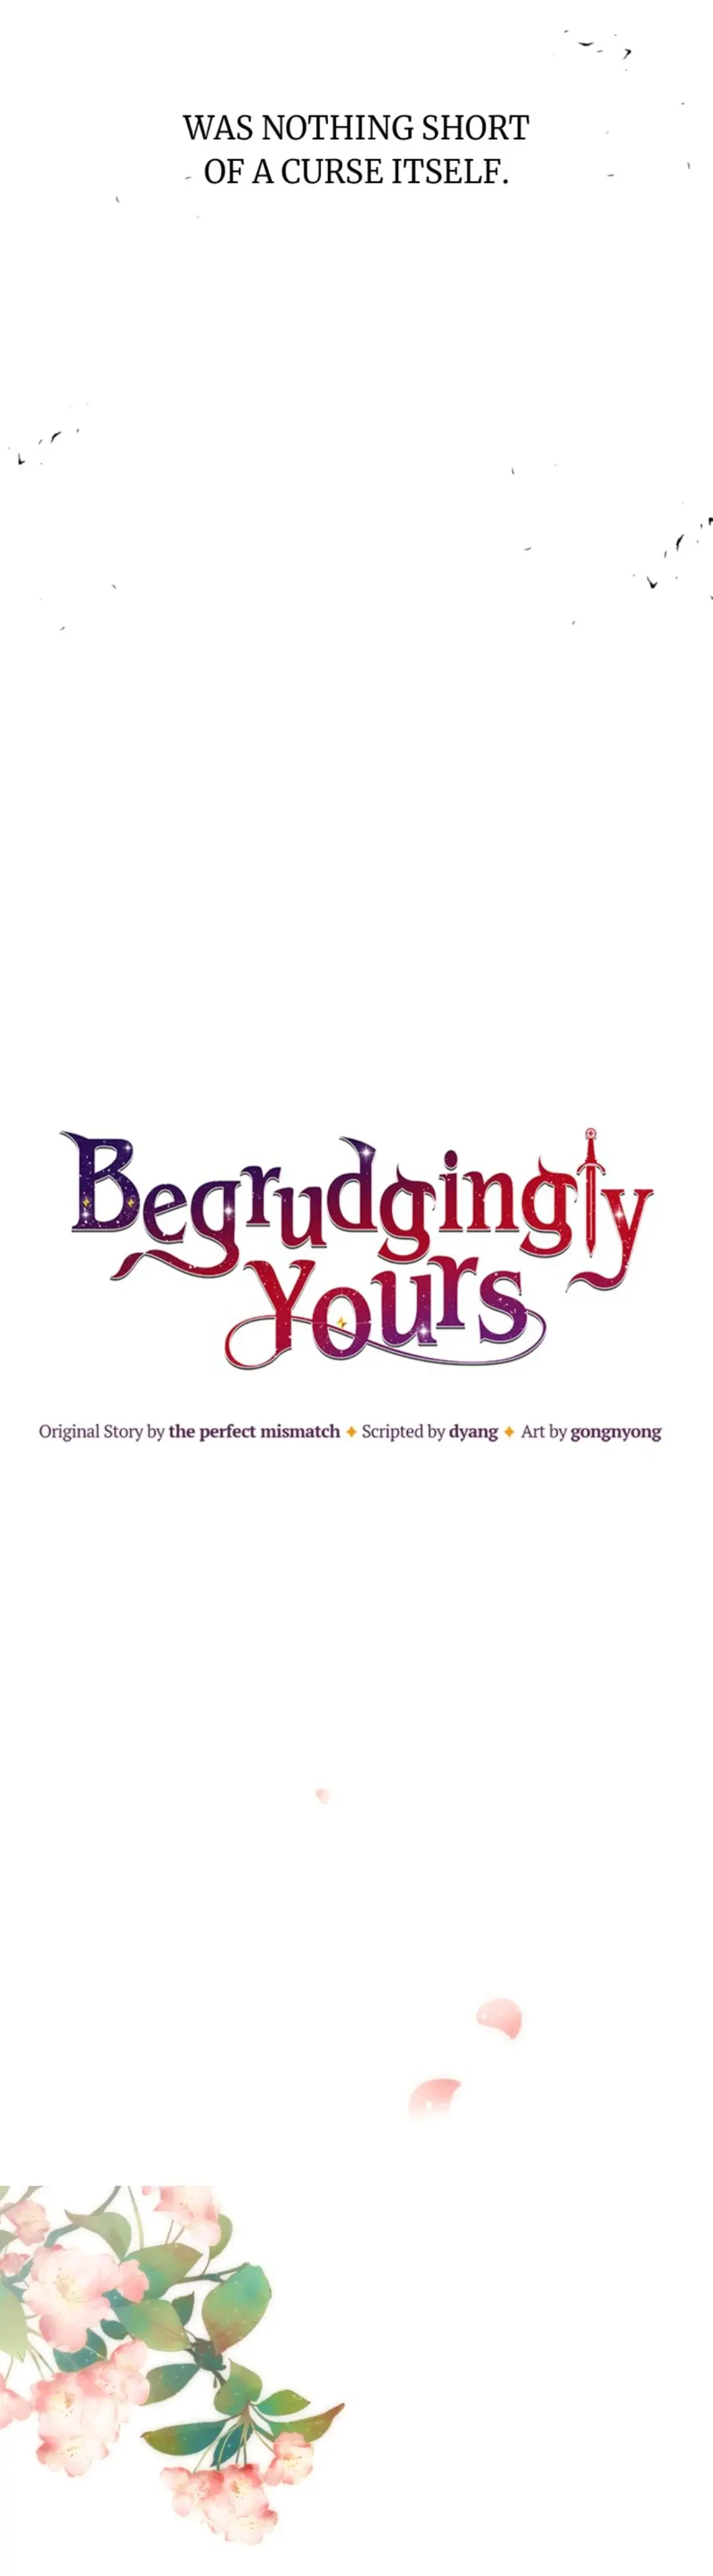 Begrudgingly Yours - 1 page 20-3594c10a